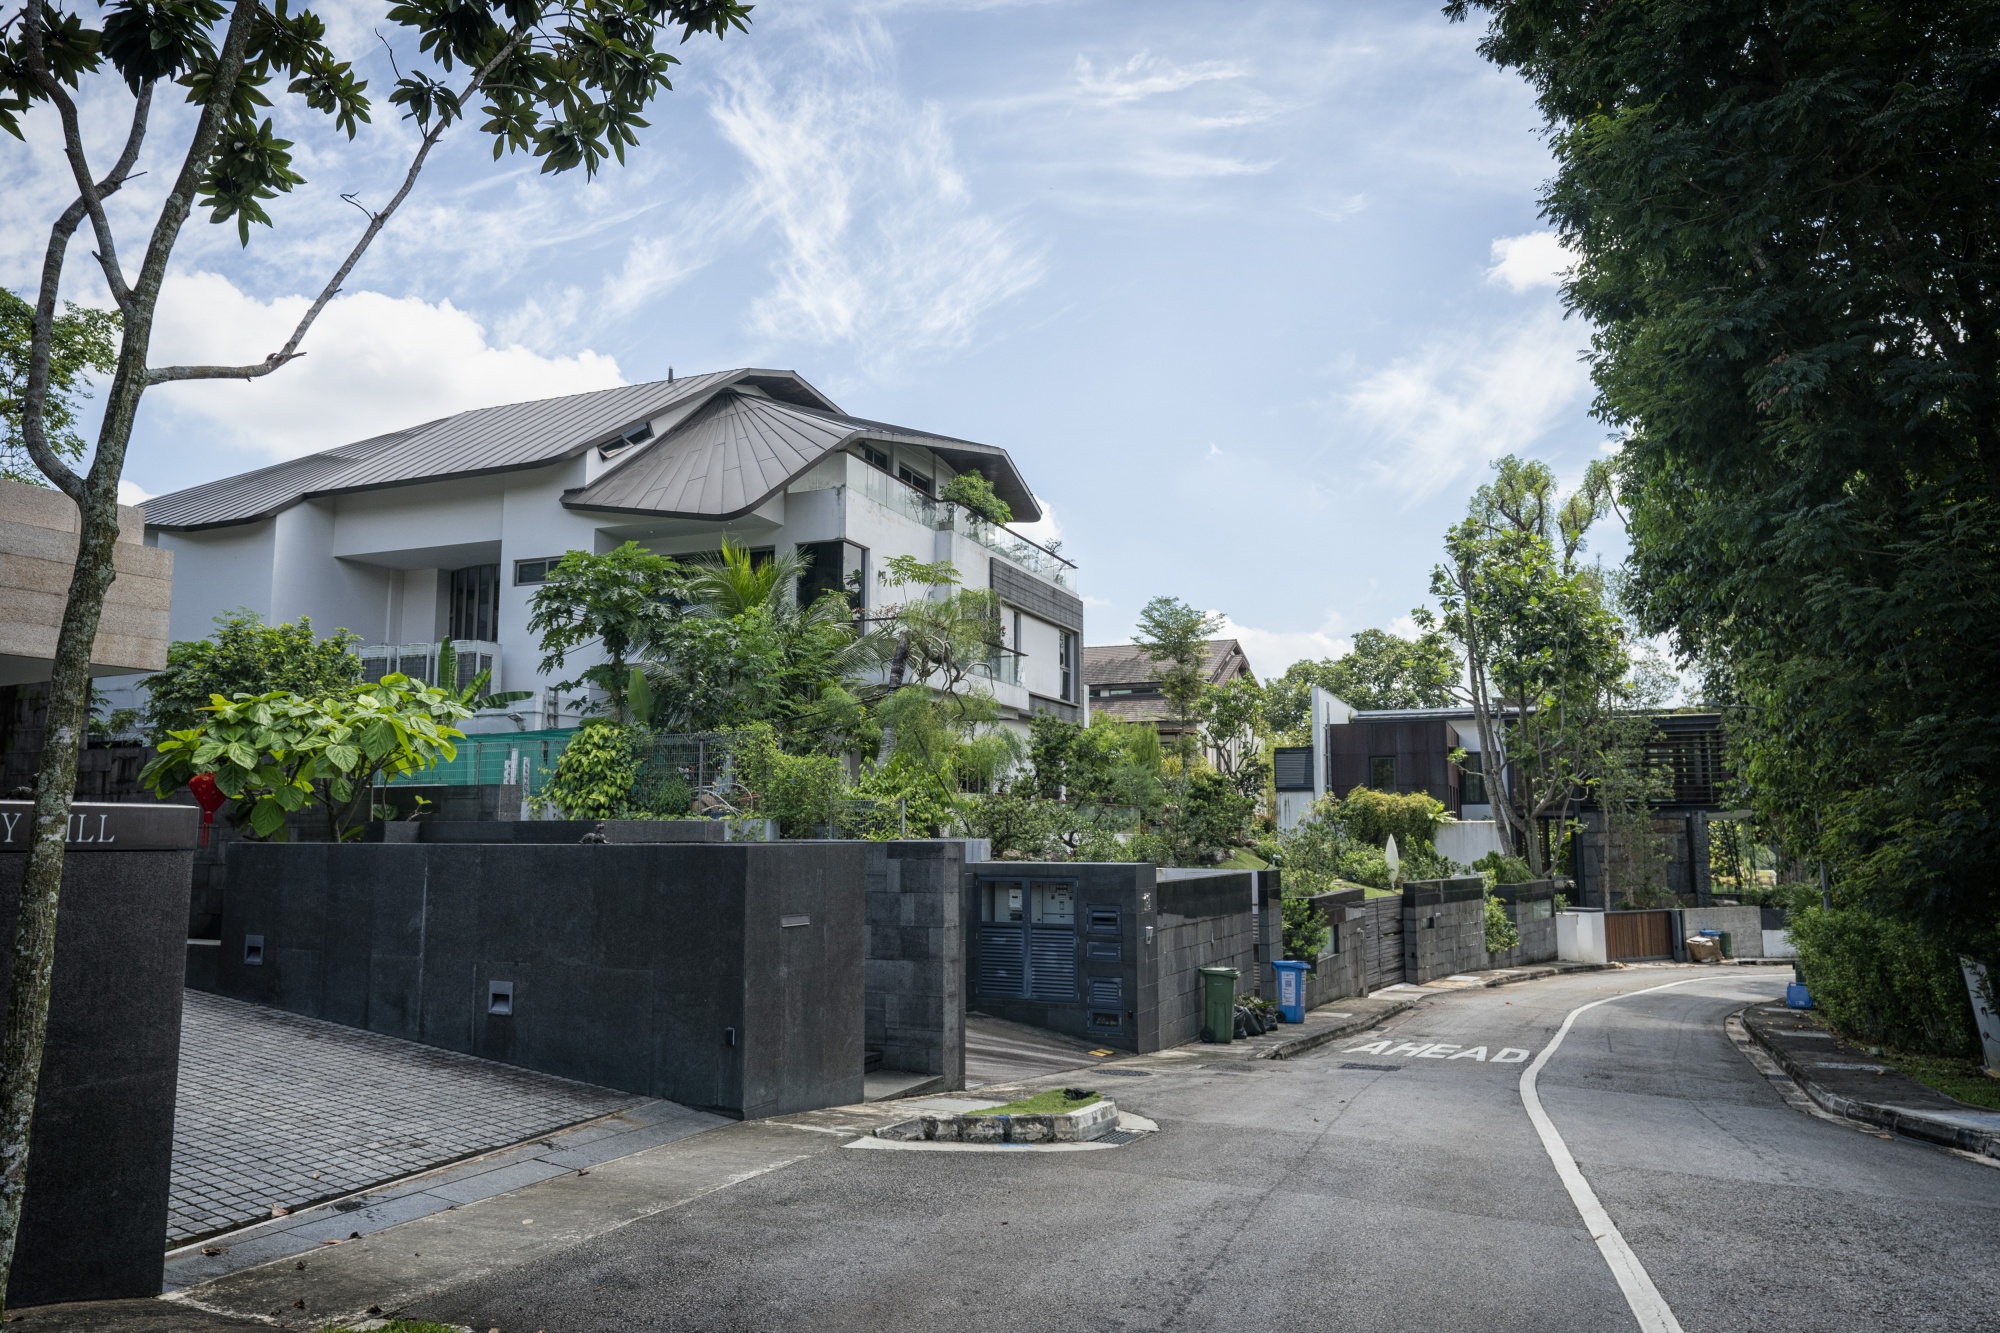 Transactions of Singapore’s Most Expensive Homes Back on Track